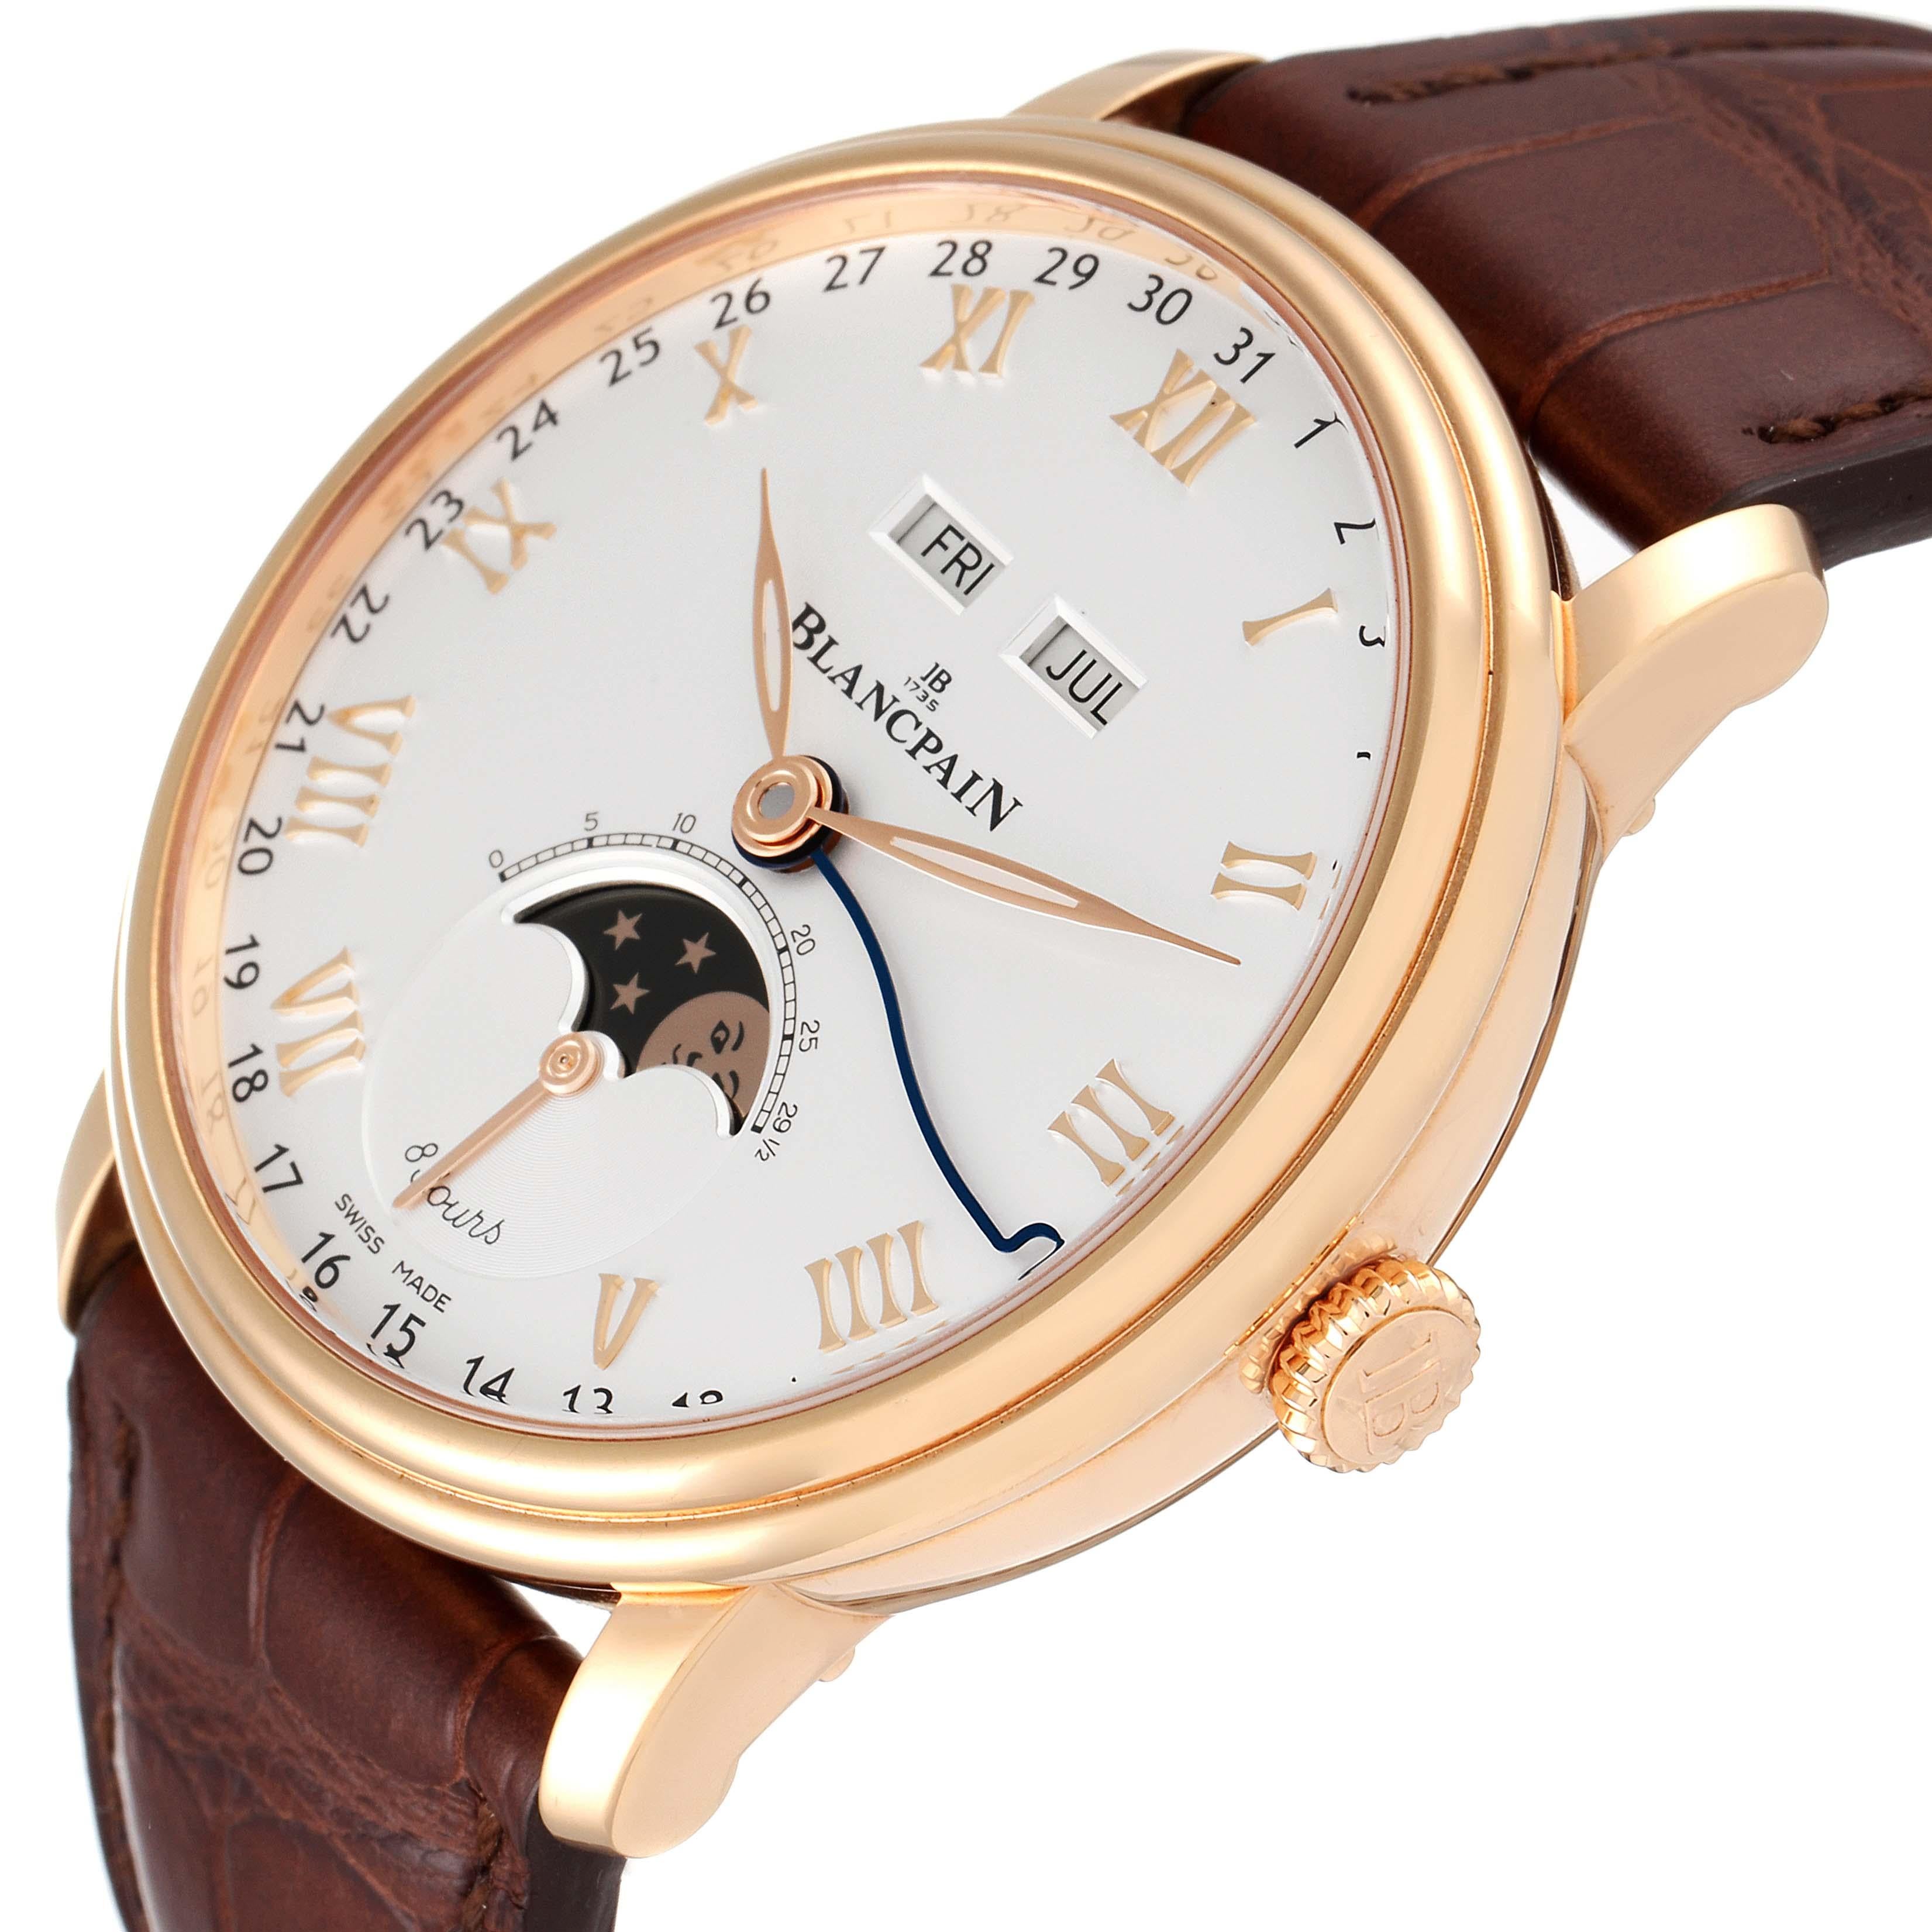 Blancpain Villeret Complete Calendar 8 Days Rose Gold Watch 6639 Box Papers In Excellent Condition For Sale In Atlanta, GA